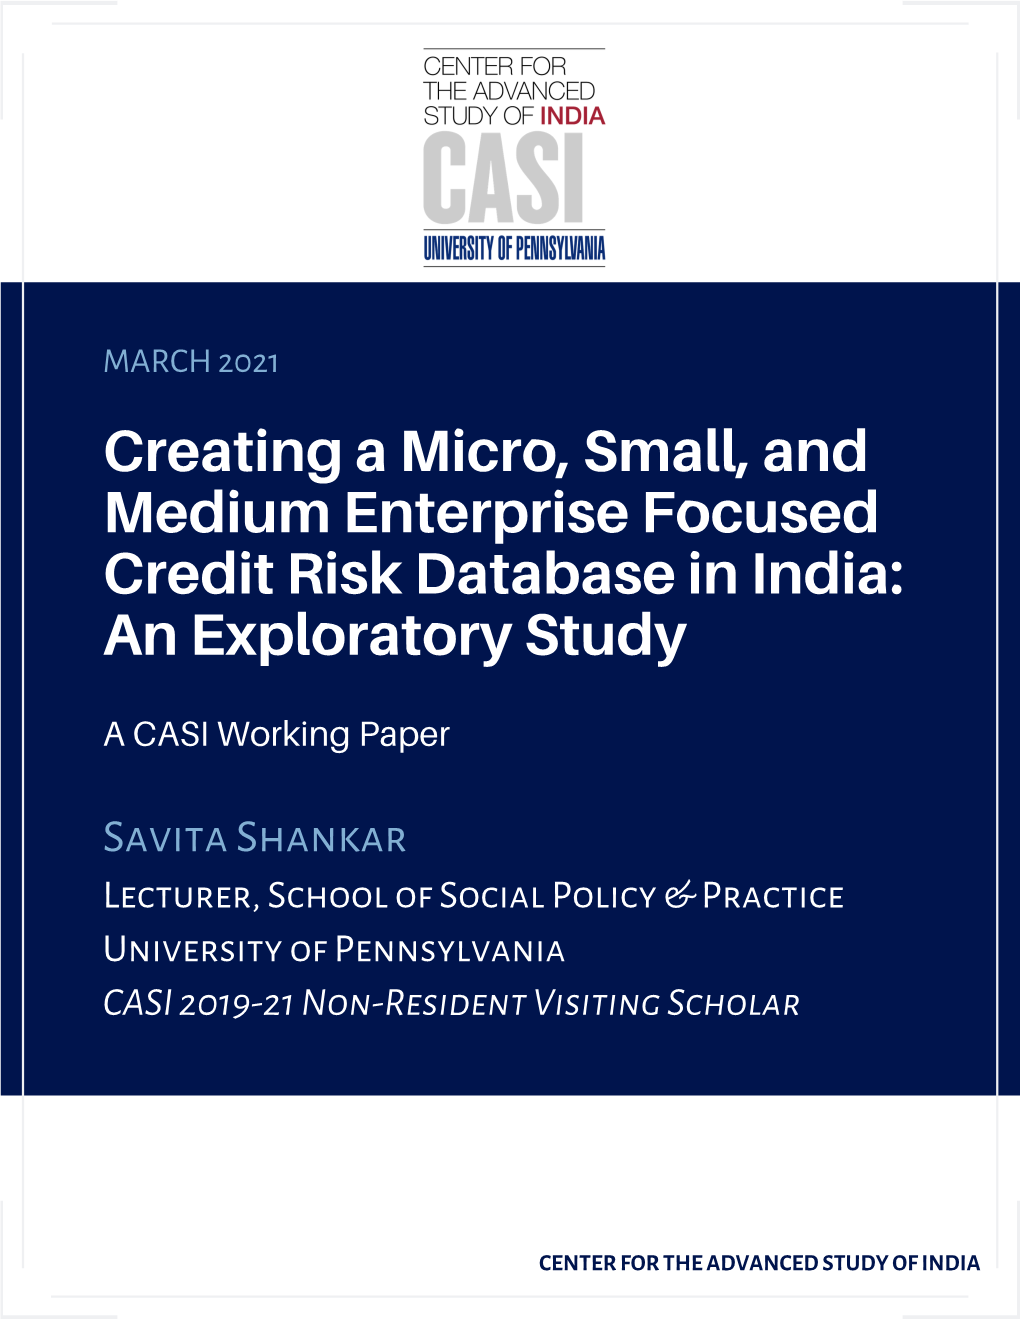 Creating a Micro, Small, and Medium Enterprise Focused Credit Risk Database in India: an Exploratory Study